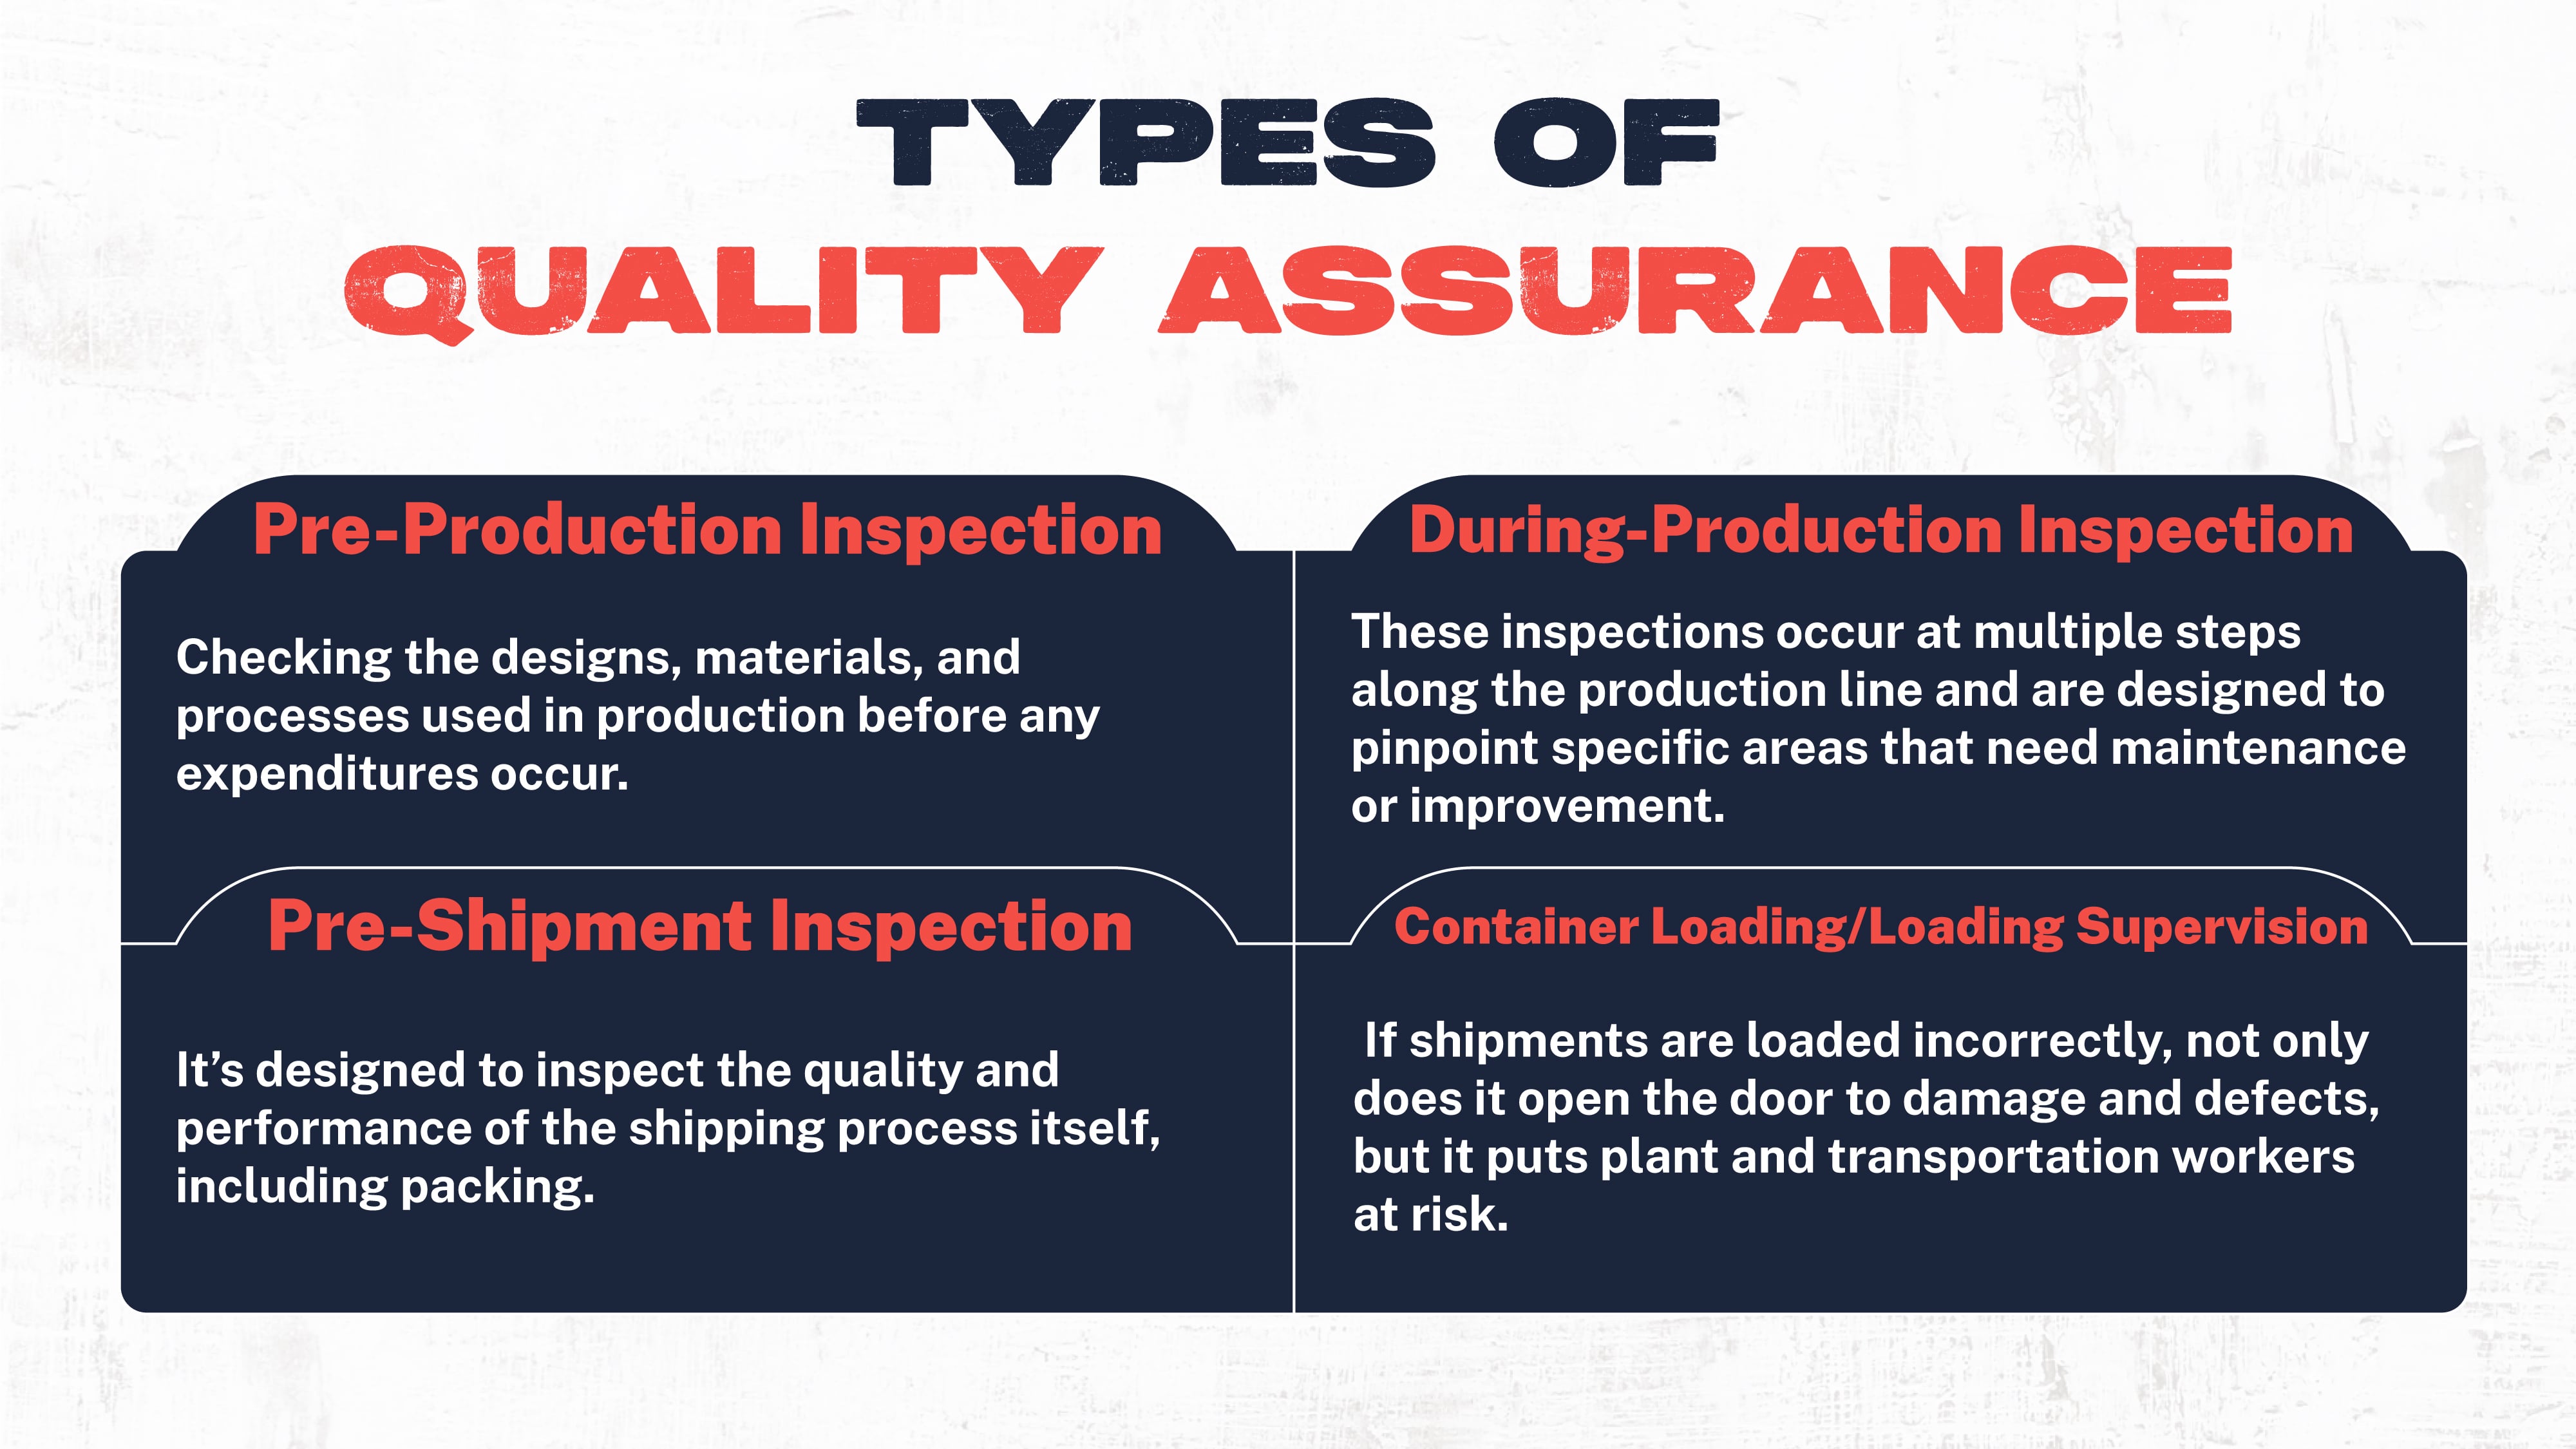 Types of Quality Assurance